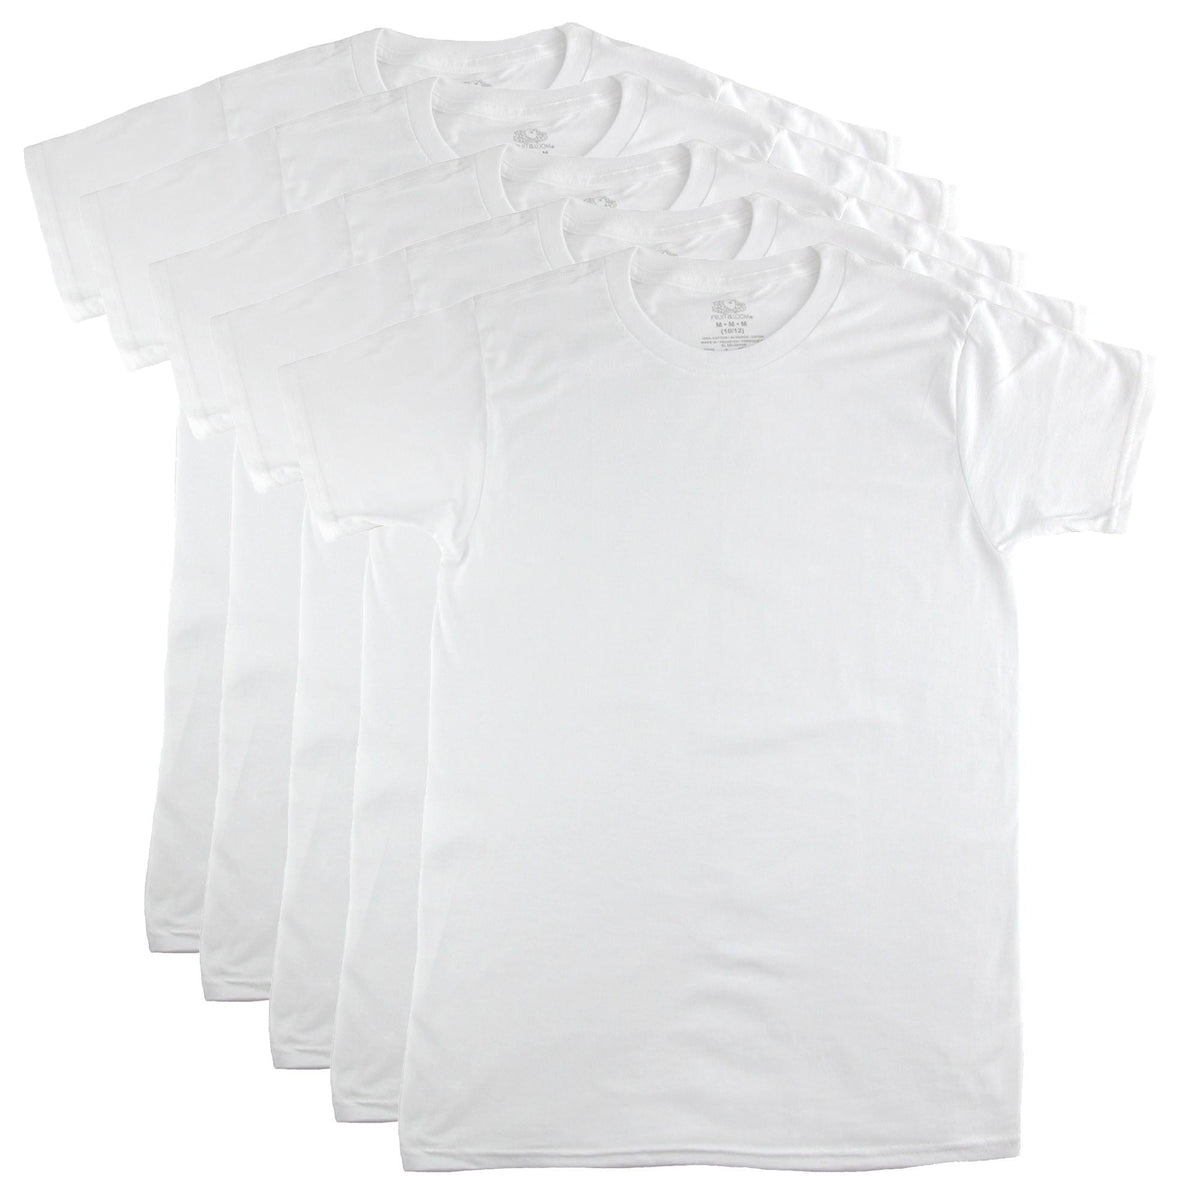 Boy's Cotton Crew Neck Tee Shirt (Pack of 5) by Fruit of the Loom ...